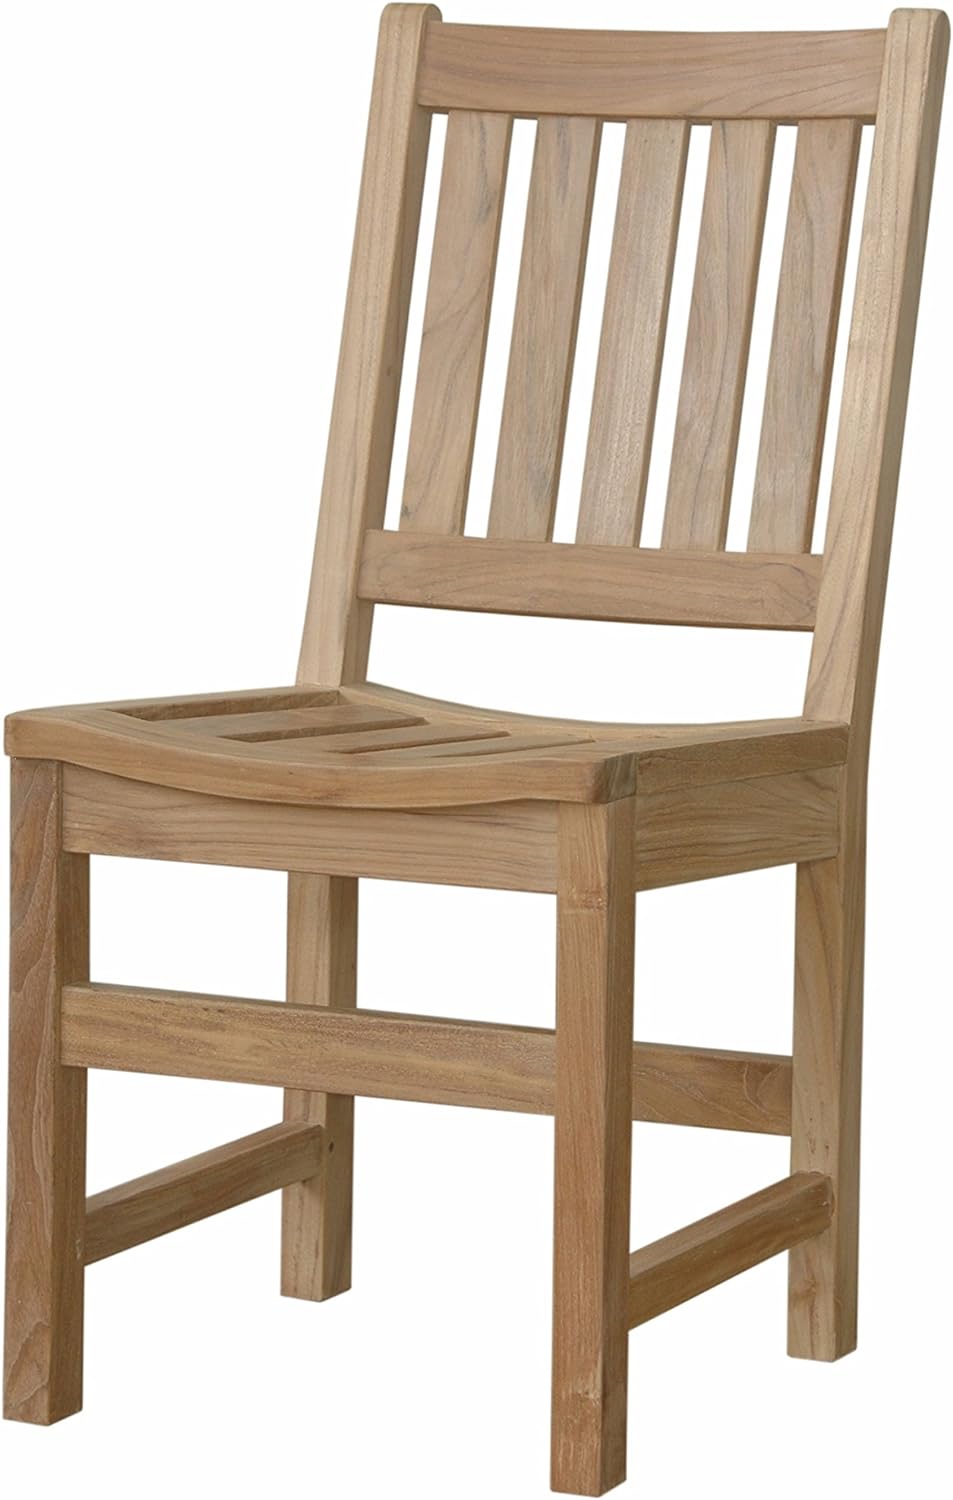 Anderson Teak Sonoma Dining Chair